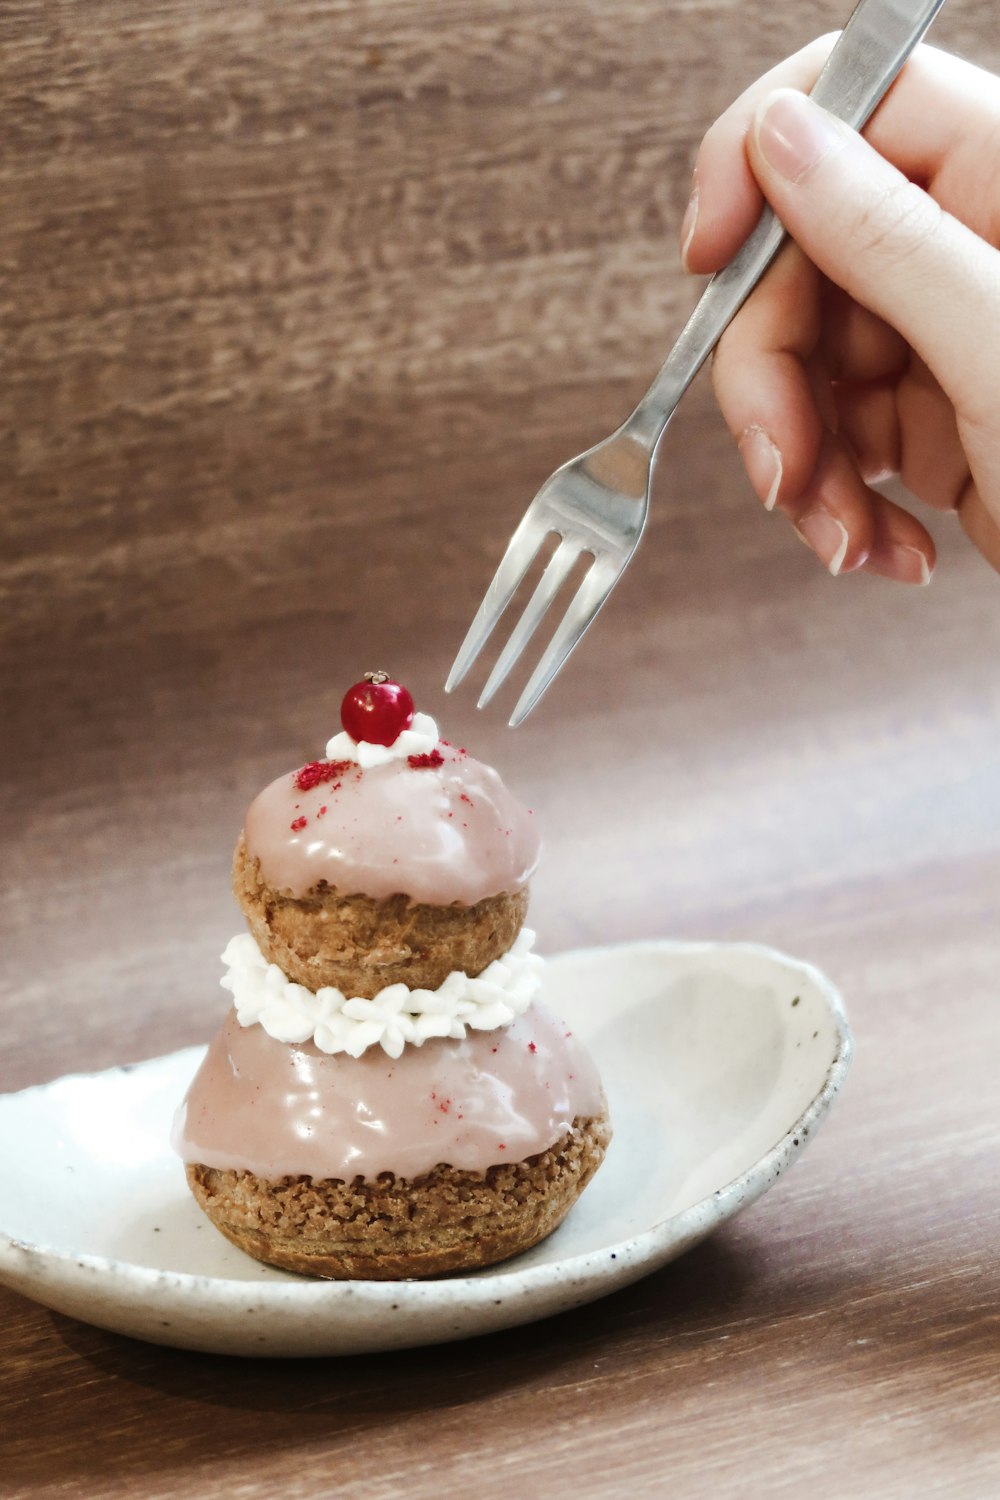 a person is holding a fork over a cupcake on a plate